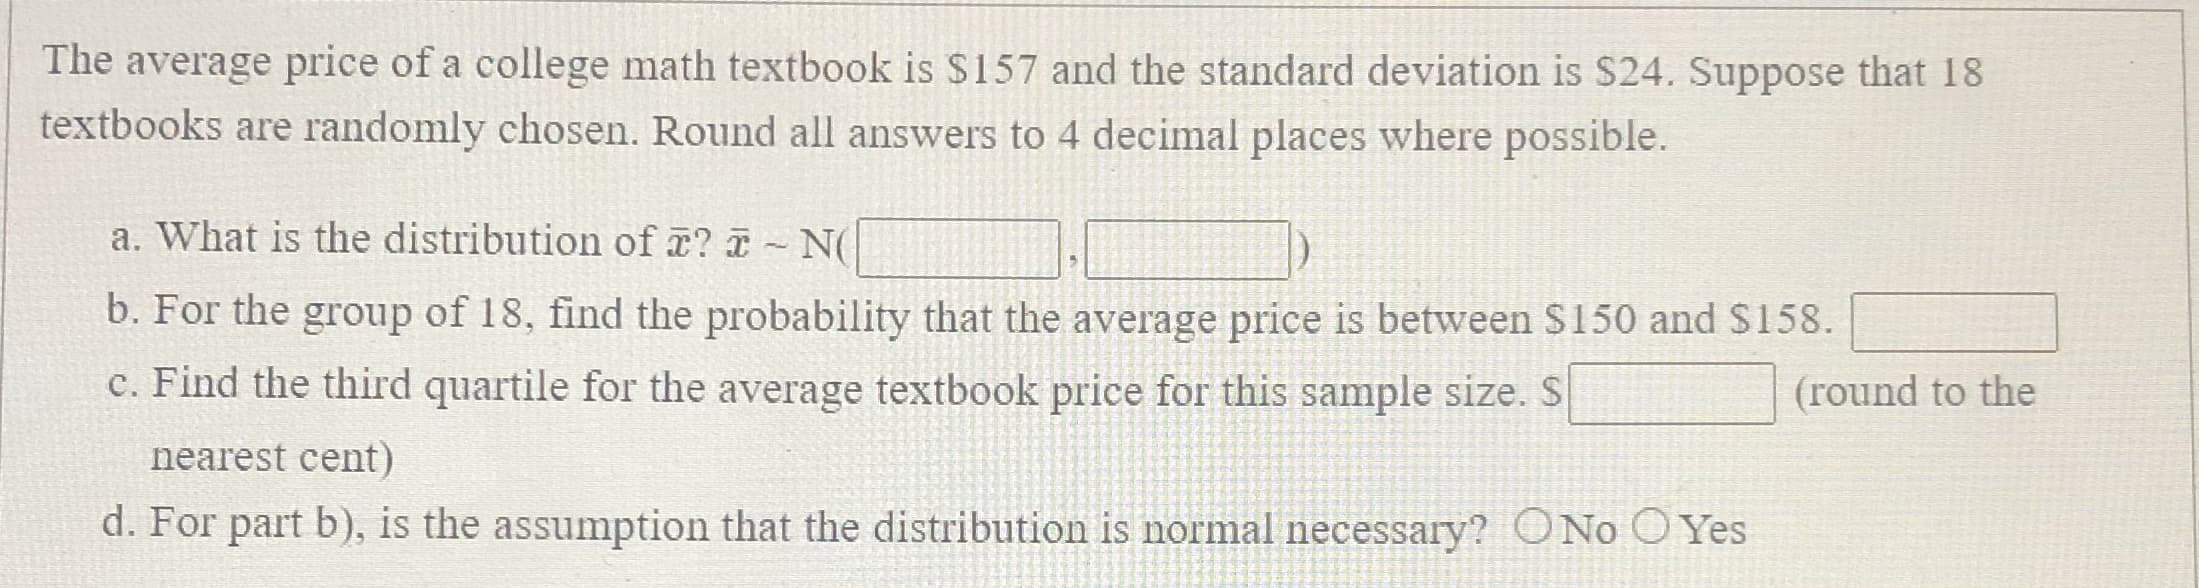 The average price of a college math textbook is $157 and the standard deviation is S24. Suppose that 18
textbooks are randomly chosen. Round all answers to 4 decimal places where possible.
a. What is the distribution of ? - NC
b. For the group of 18, find the probability that the average price is between S150 and $158.
c. Find the third quartile for the average textbook price for this sample size. S
(round to the
nearest cent)
d. For part b), is the assumption that the distribution is normal necessary? ONo O Yes
